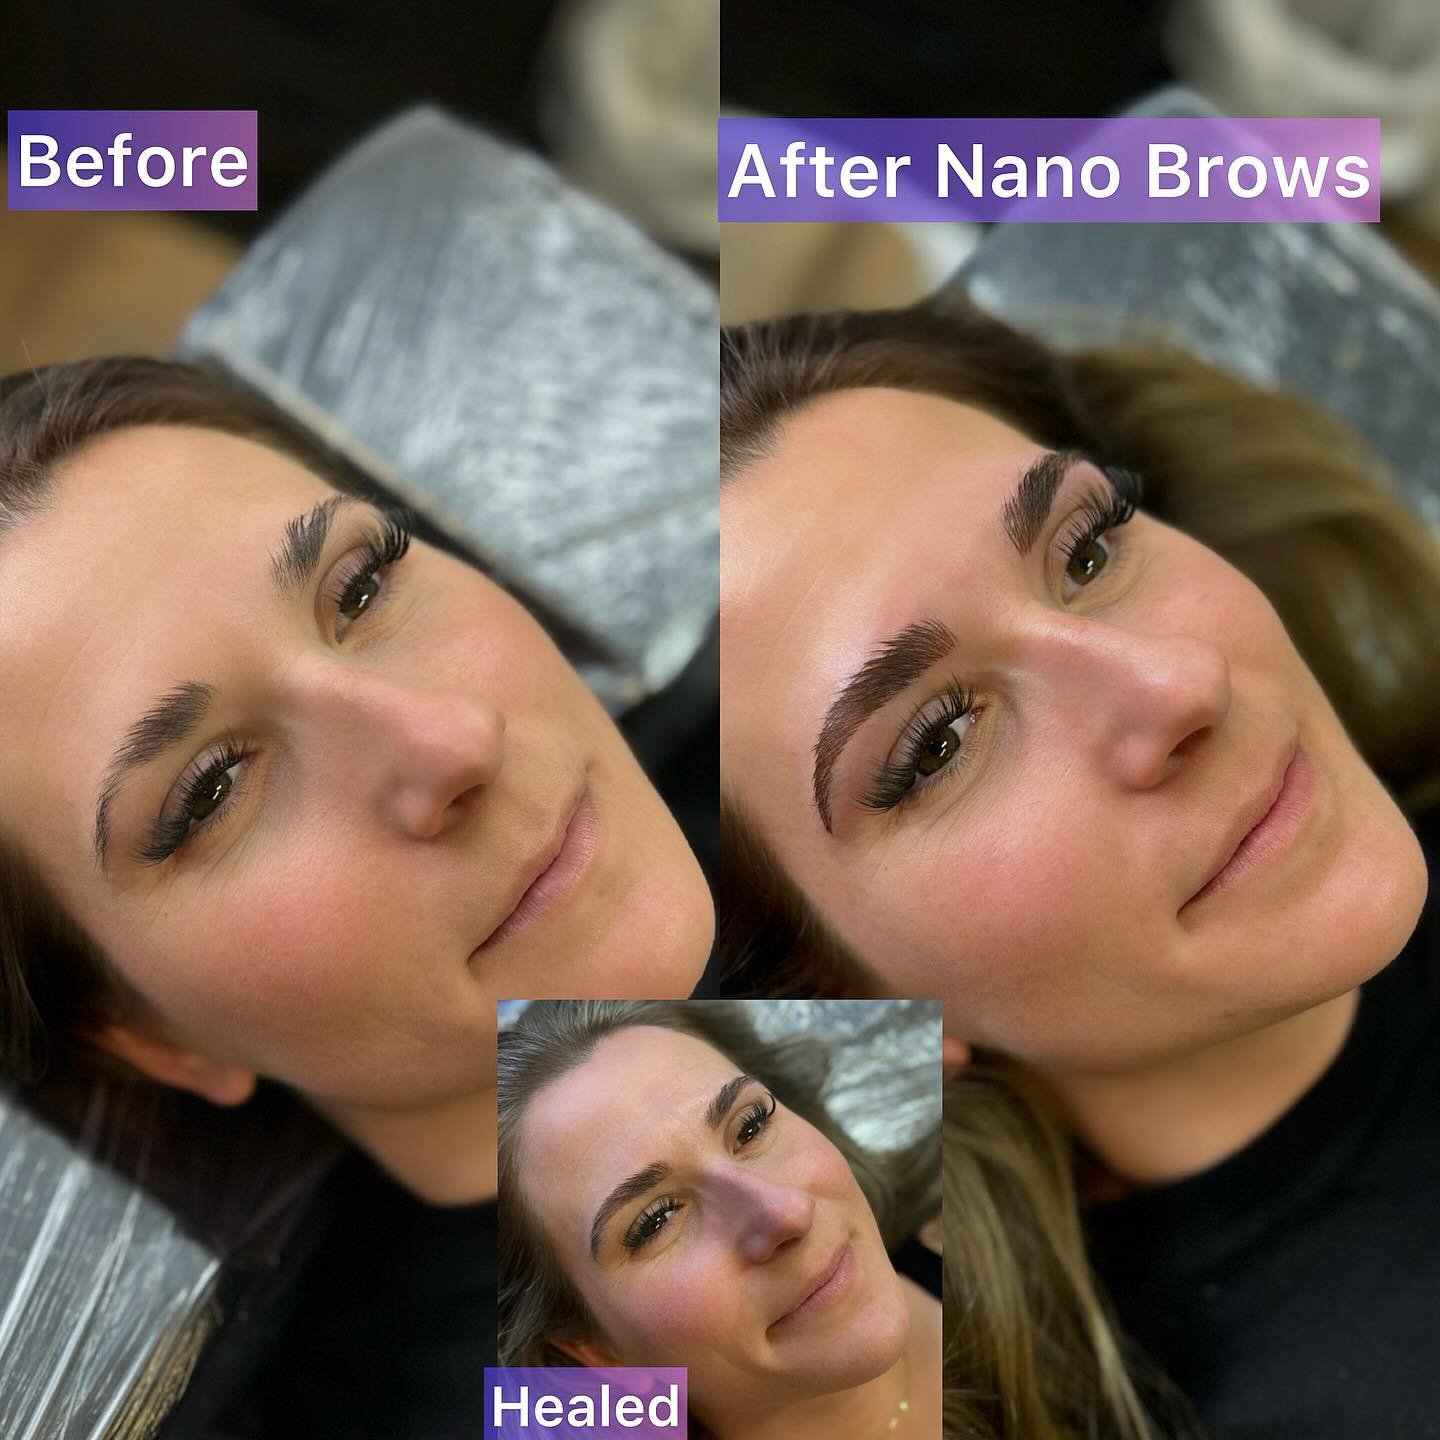 No more patchy brows 💪🏼 
Flawless brows right when you wake up 🤗

&bull;Book in for a free consultation 

www.lashiousstudio.com

#brows #nanobrows #pmubrows #yxebrows #browtattoo #permanentmakeup #cosmetictattoo #browartist #cosmetictattooartist 